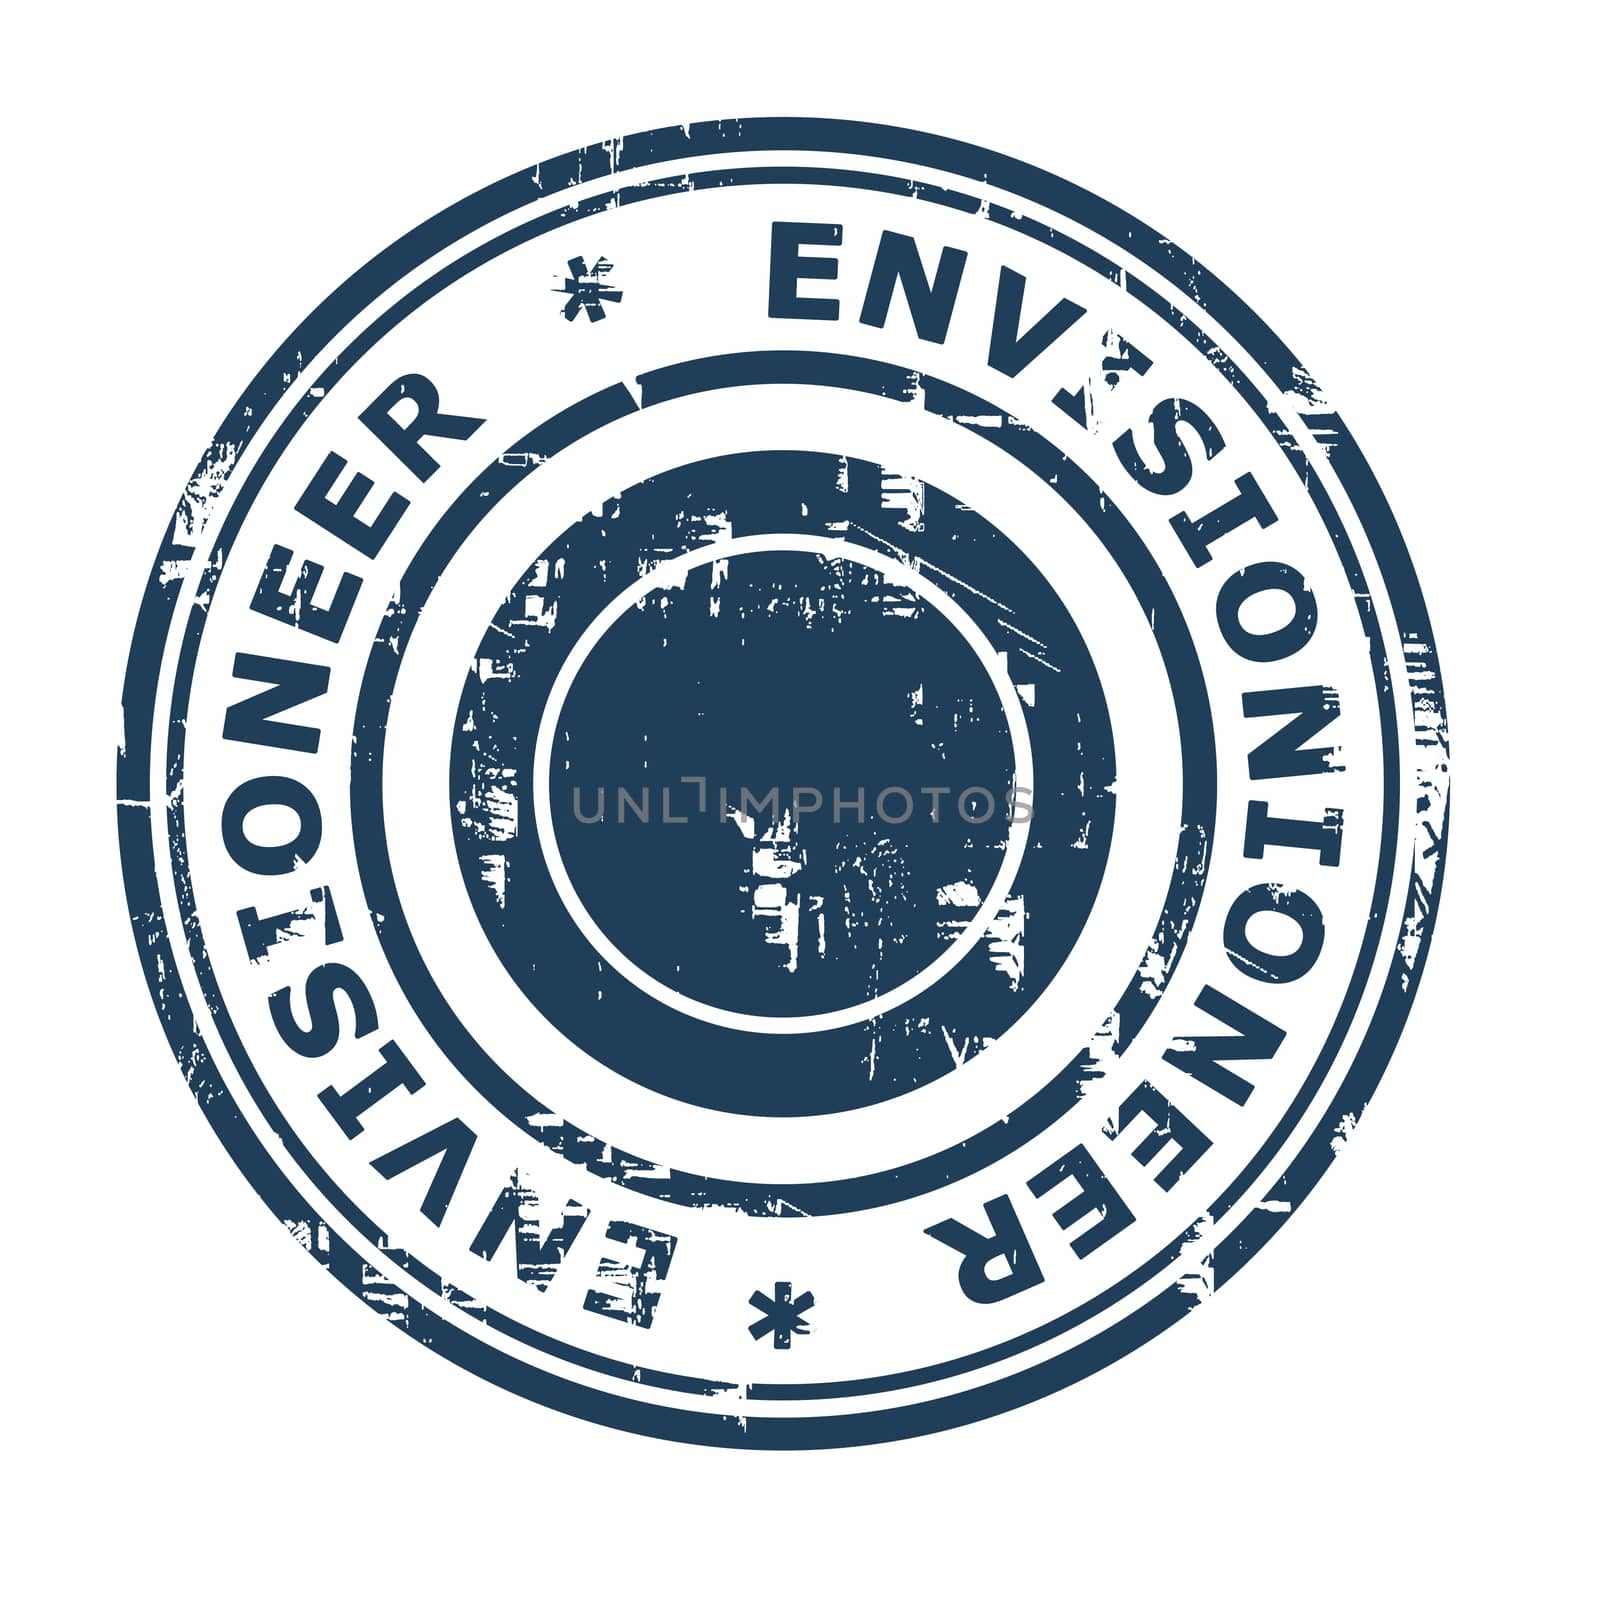 Envisionioneer business concept rubber stamp isolated on a white background.